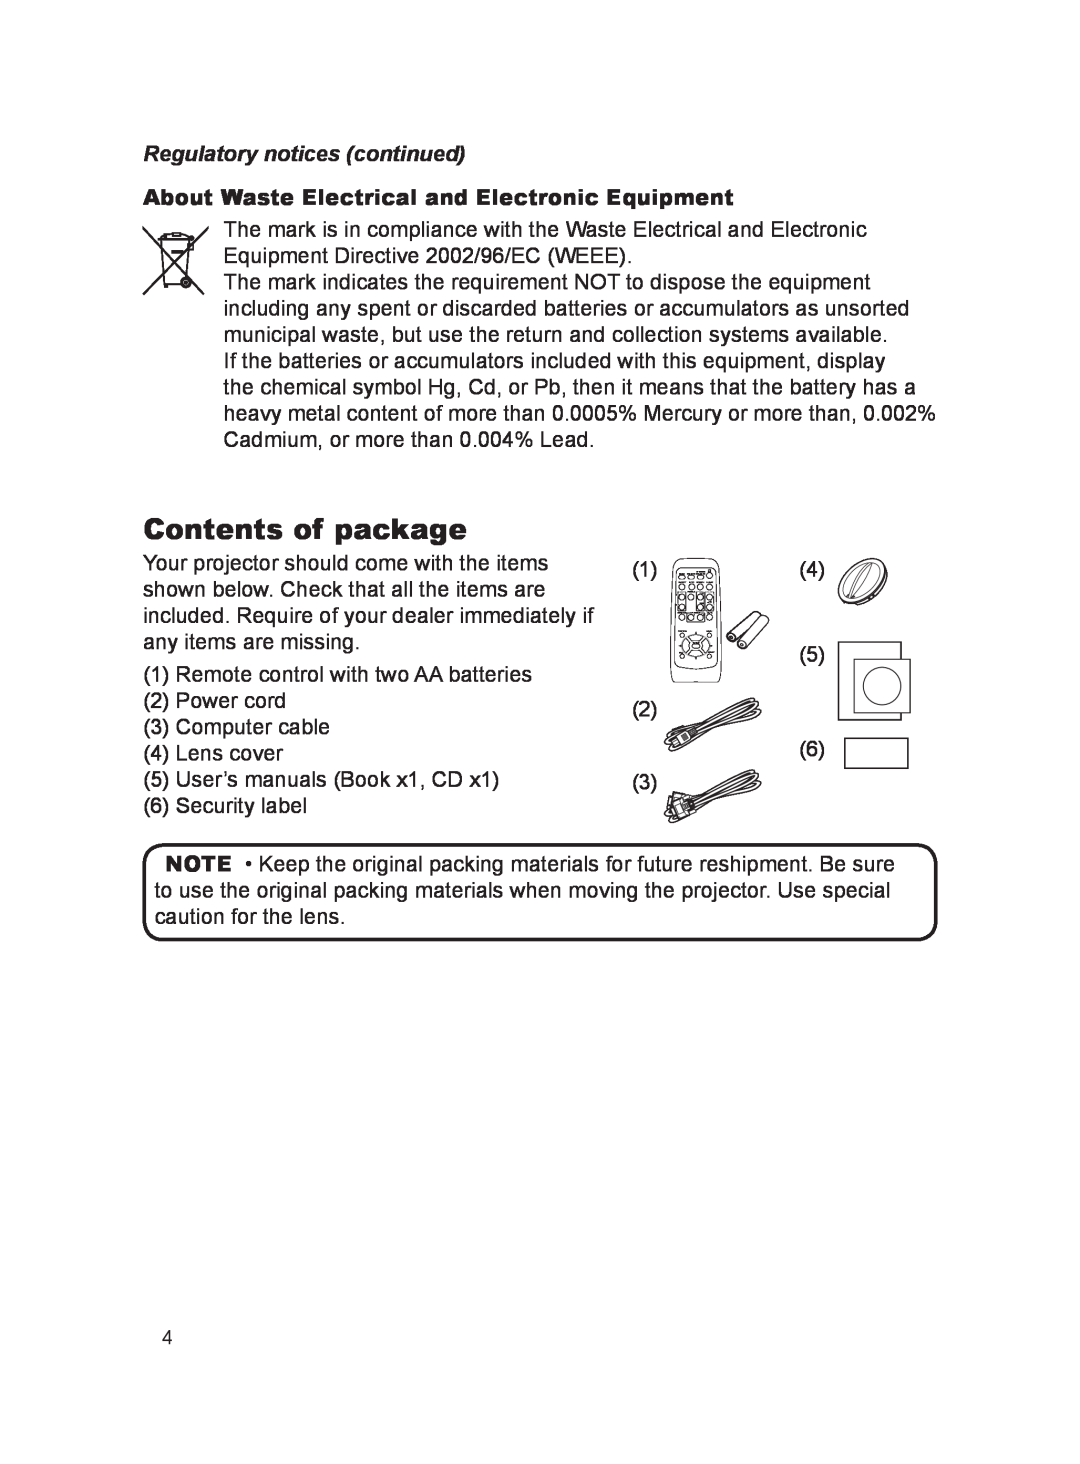 Dukane 8755K, 8923H Contents of package, Regulatory notices continued, About Waste Electrical and Electronic Equipment 